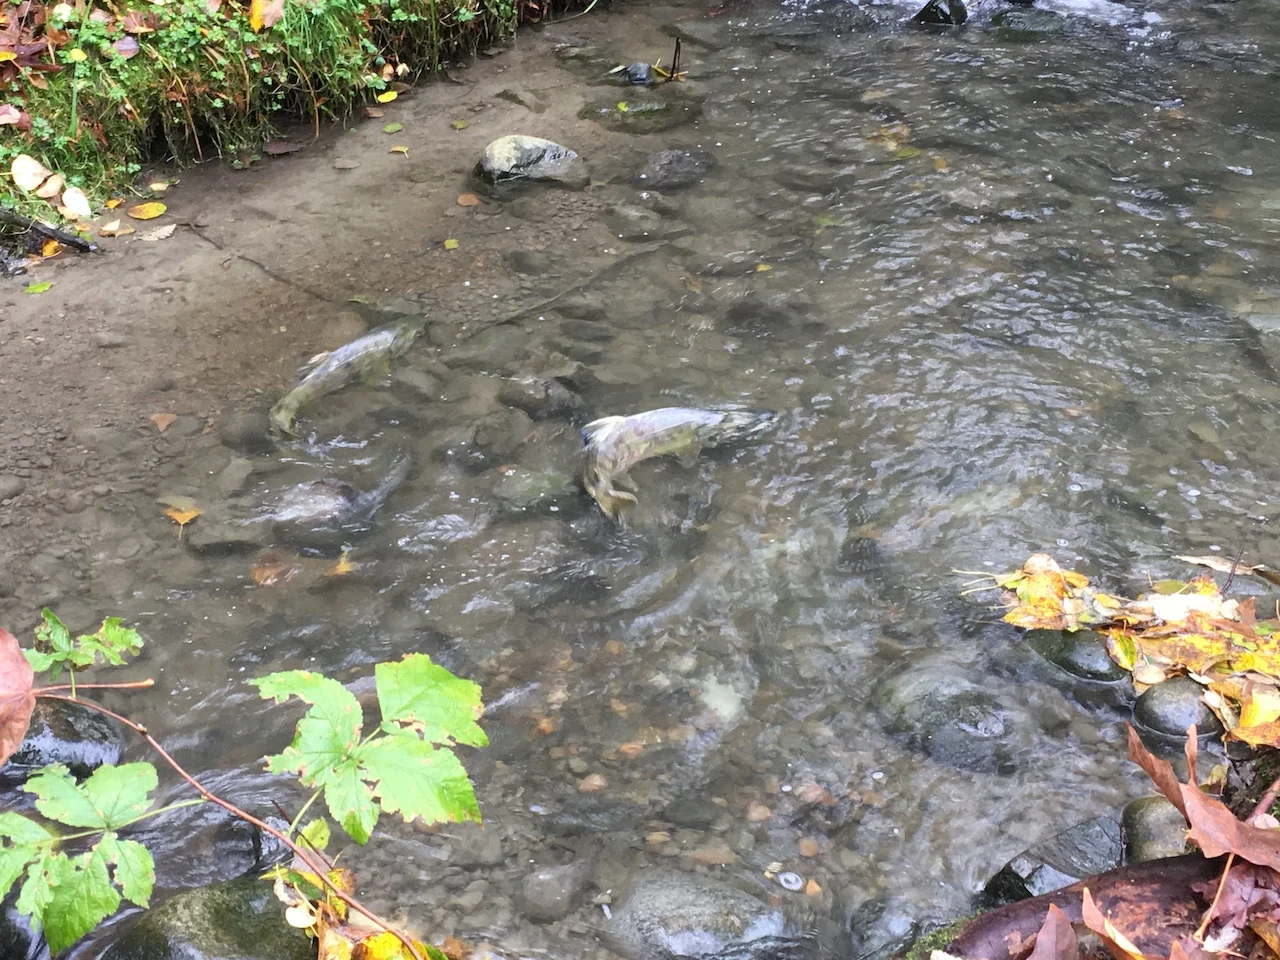 Is road salt hurting salmon? UBC and volunteers are investigating